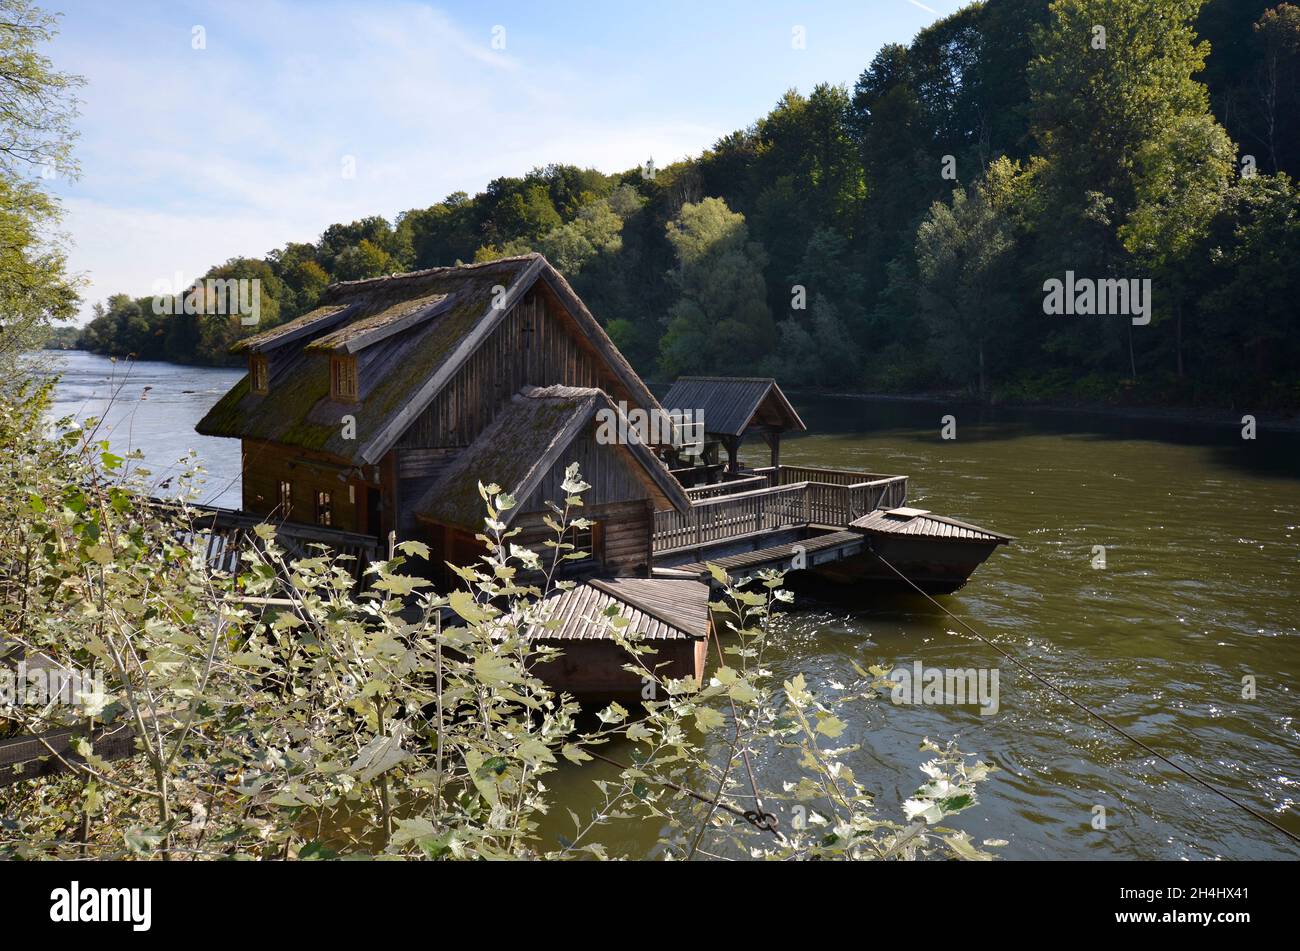 Mureck, Austria - September 24, 2021: Old ship mill on the river Mur, such mills were already used by the ancient Romans, the river forms the border b Stock Photo